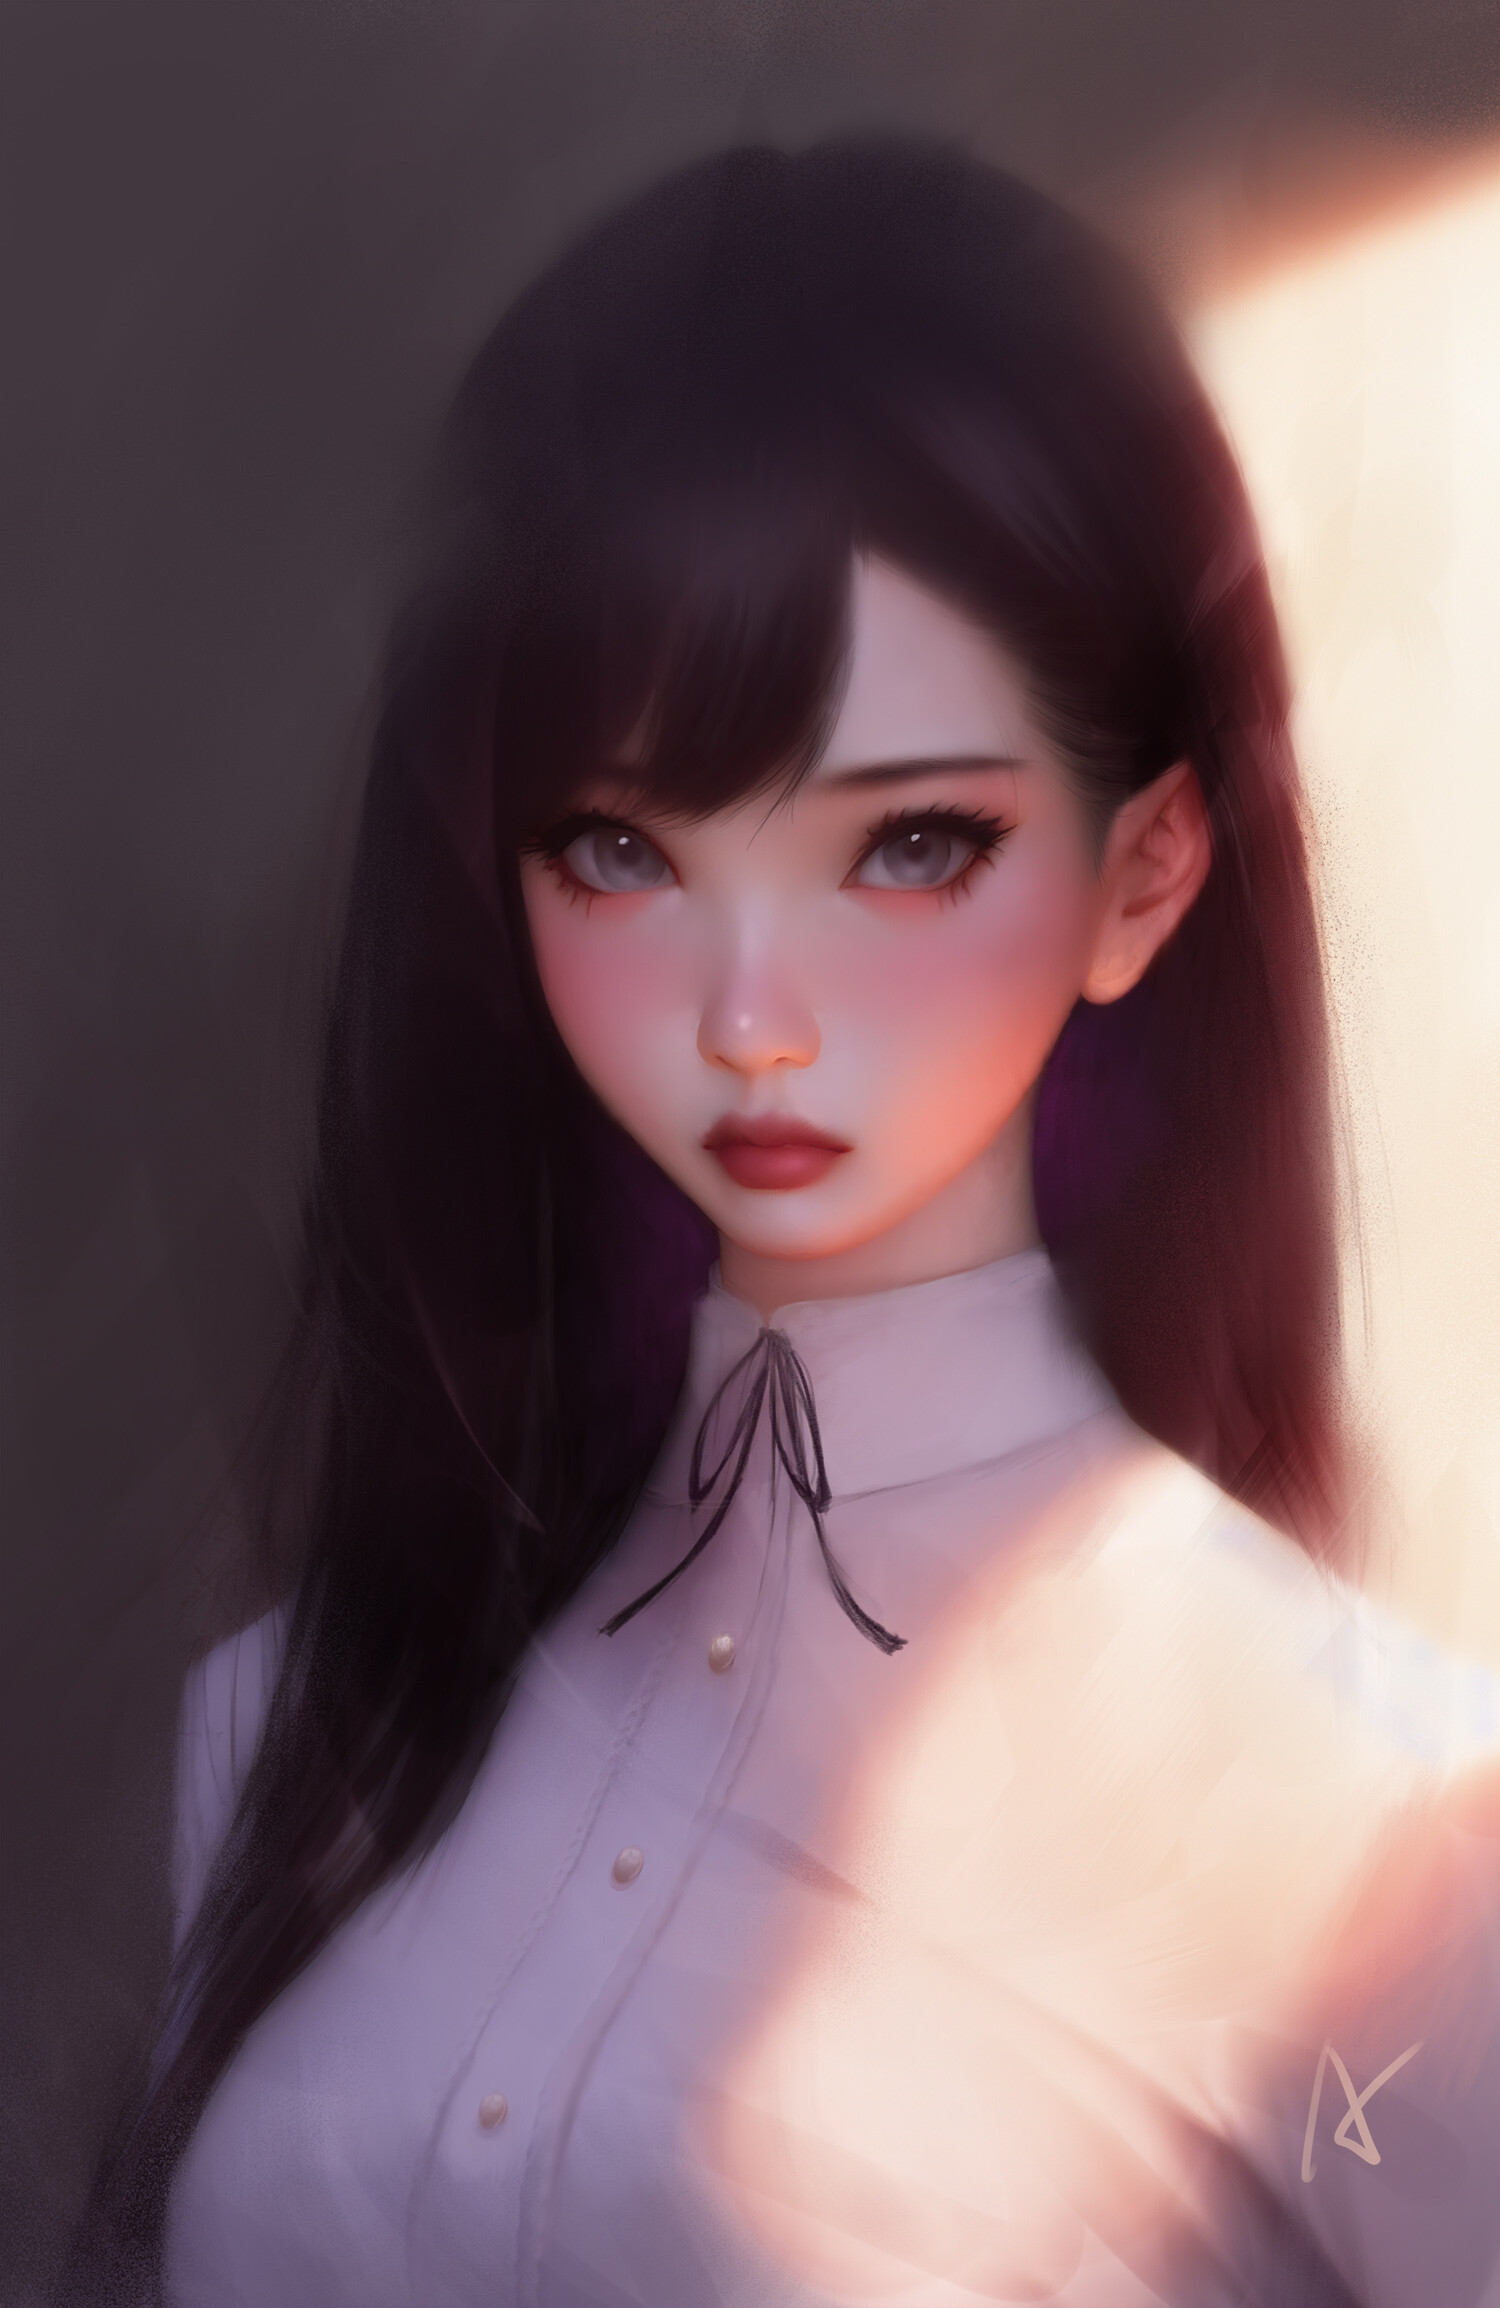 ArtStation - Portrait of a girl with black hair in a white shirt